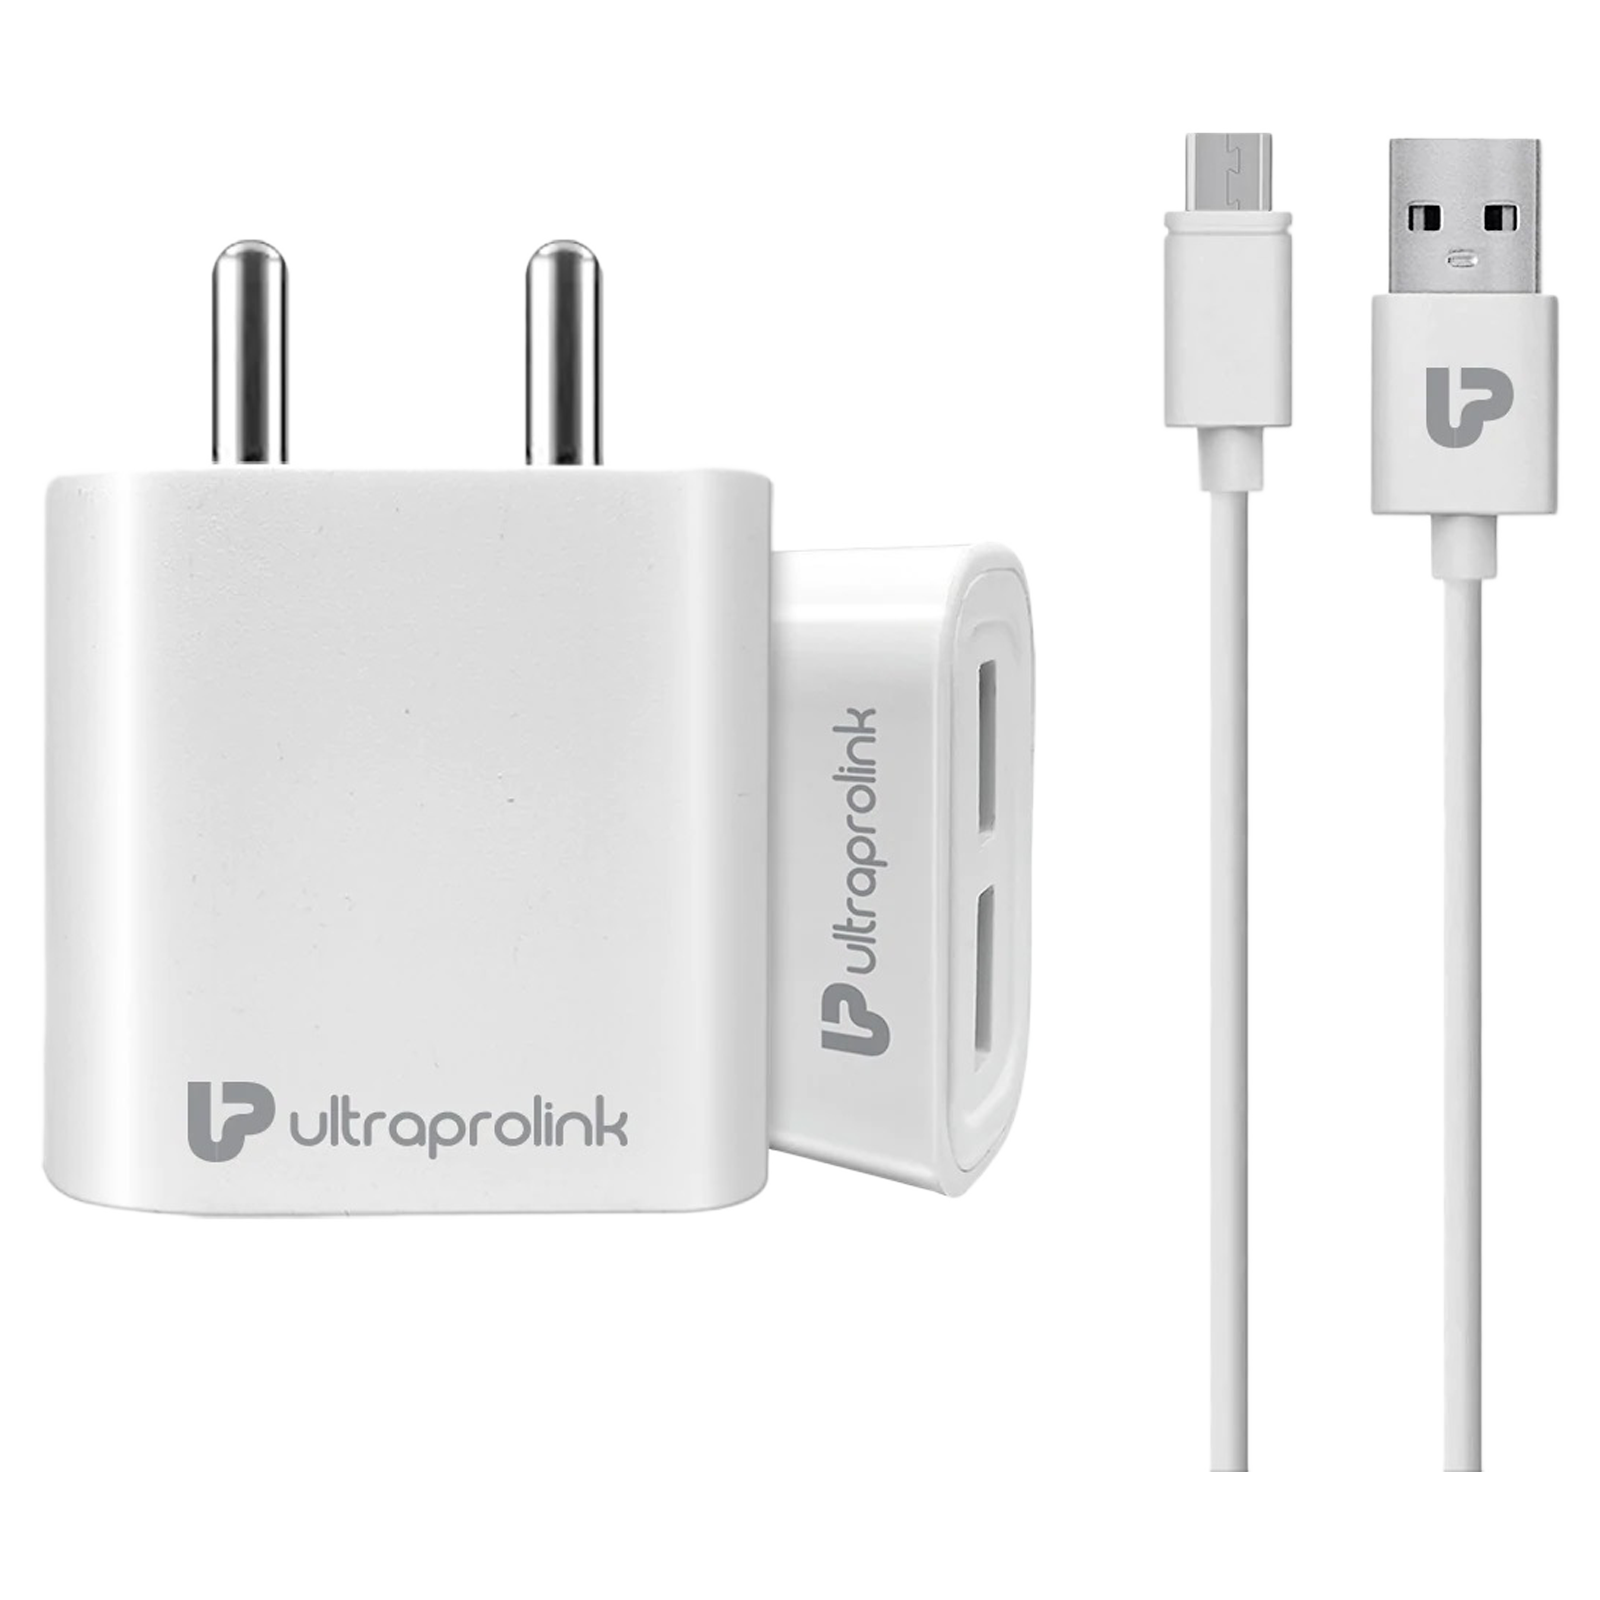 UltraProlink Boost 12 Watts/2.4 Amps 2 USB Type-A Ports Wall Charging Adapter with Micro USB Type-B Cable (Fast Charging Capability, UM1032M, White)_1